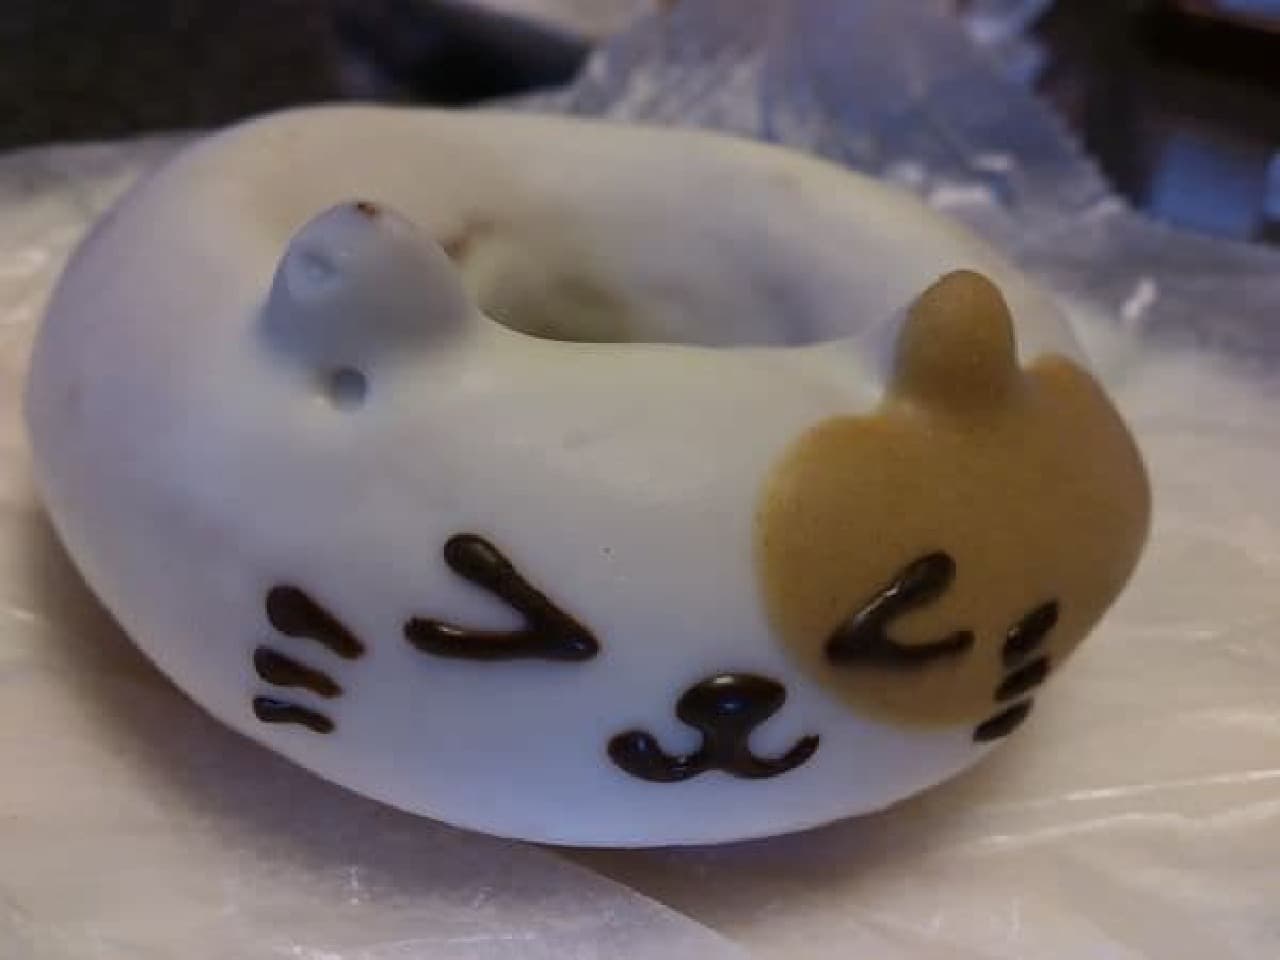 It's too cute to eat! Cuteness, deliciousness, and peace of mind